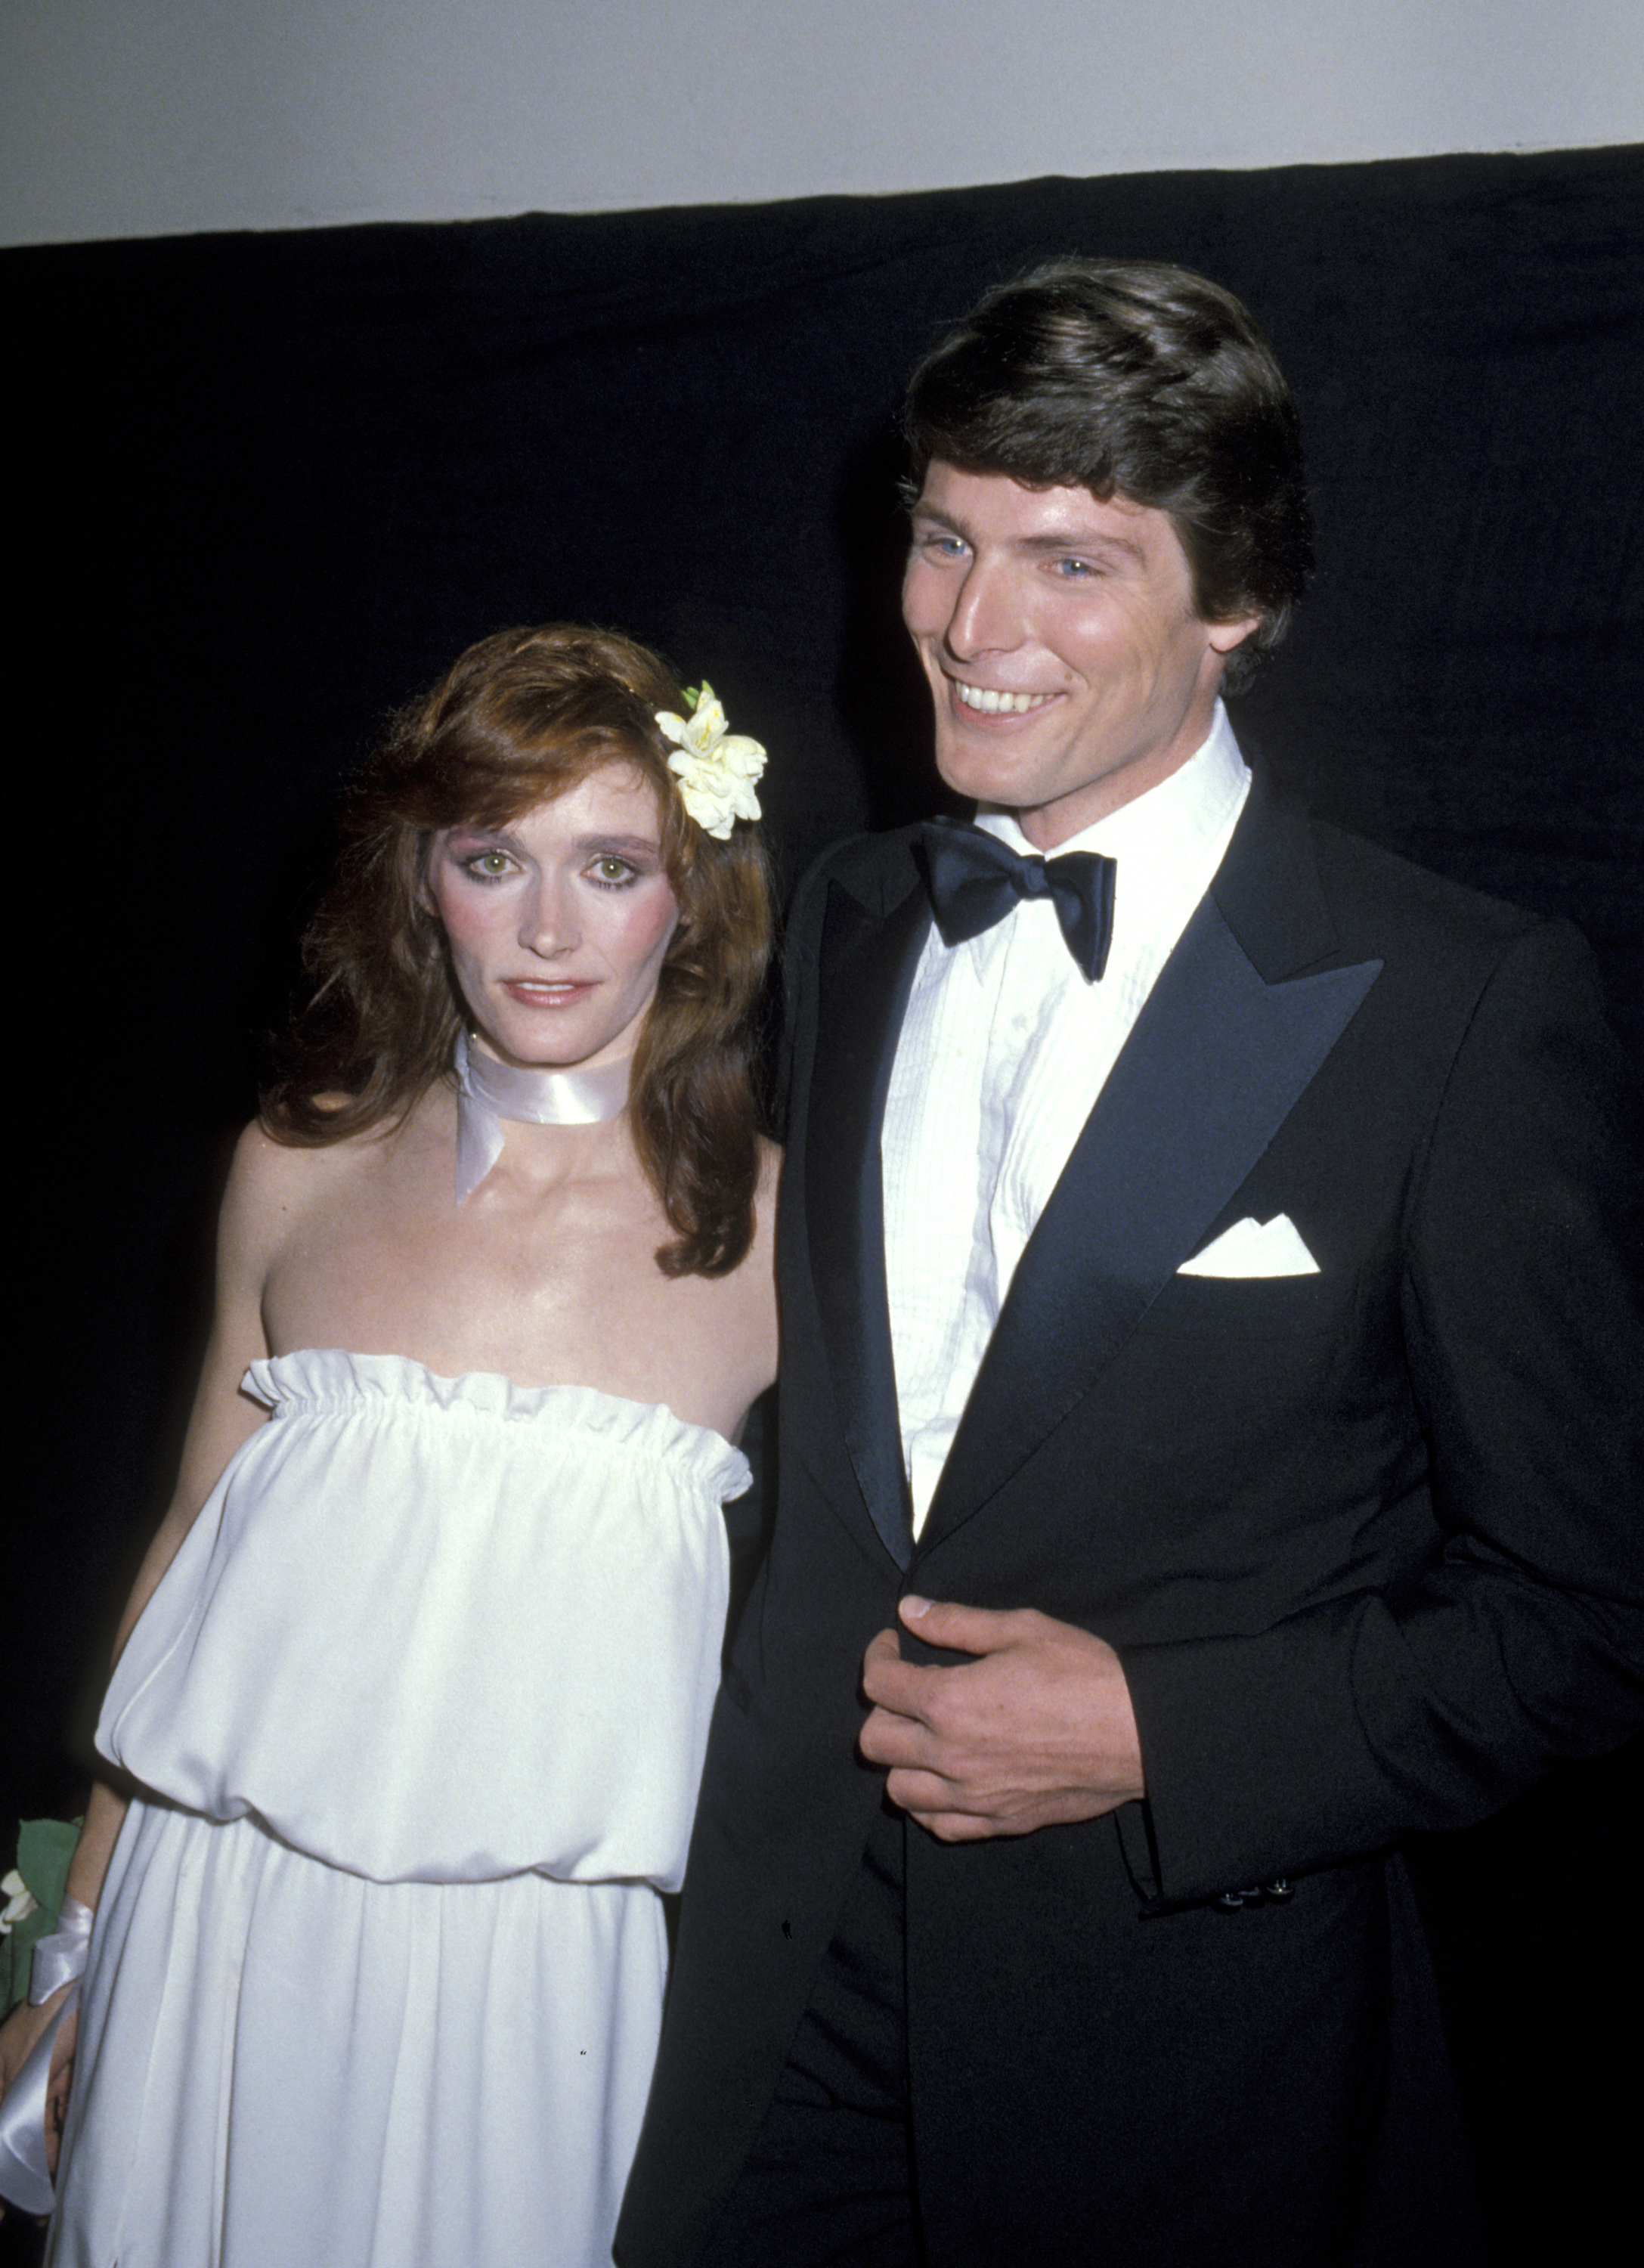 Margot Kidder and Christopher Reeve during the Presidential Premiere of "Superman" in Washington, D.C. - December 10, 1978, at JFK Center for the Performing Arts, Eisenhower Theater in Washington, D.C., United States. | Source: Getty Images